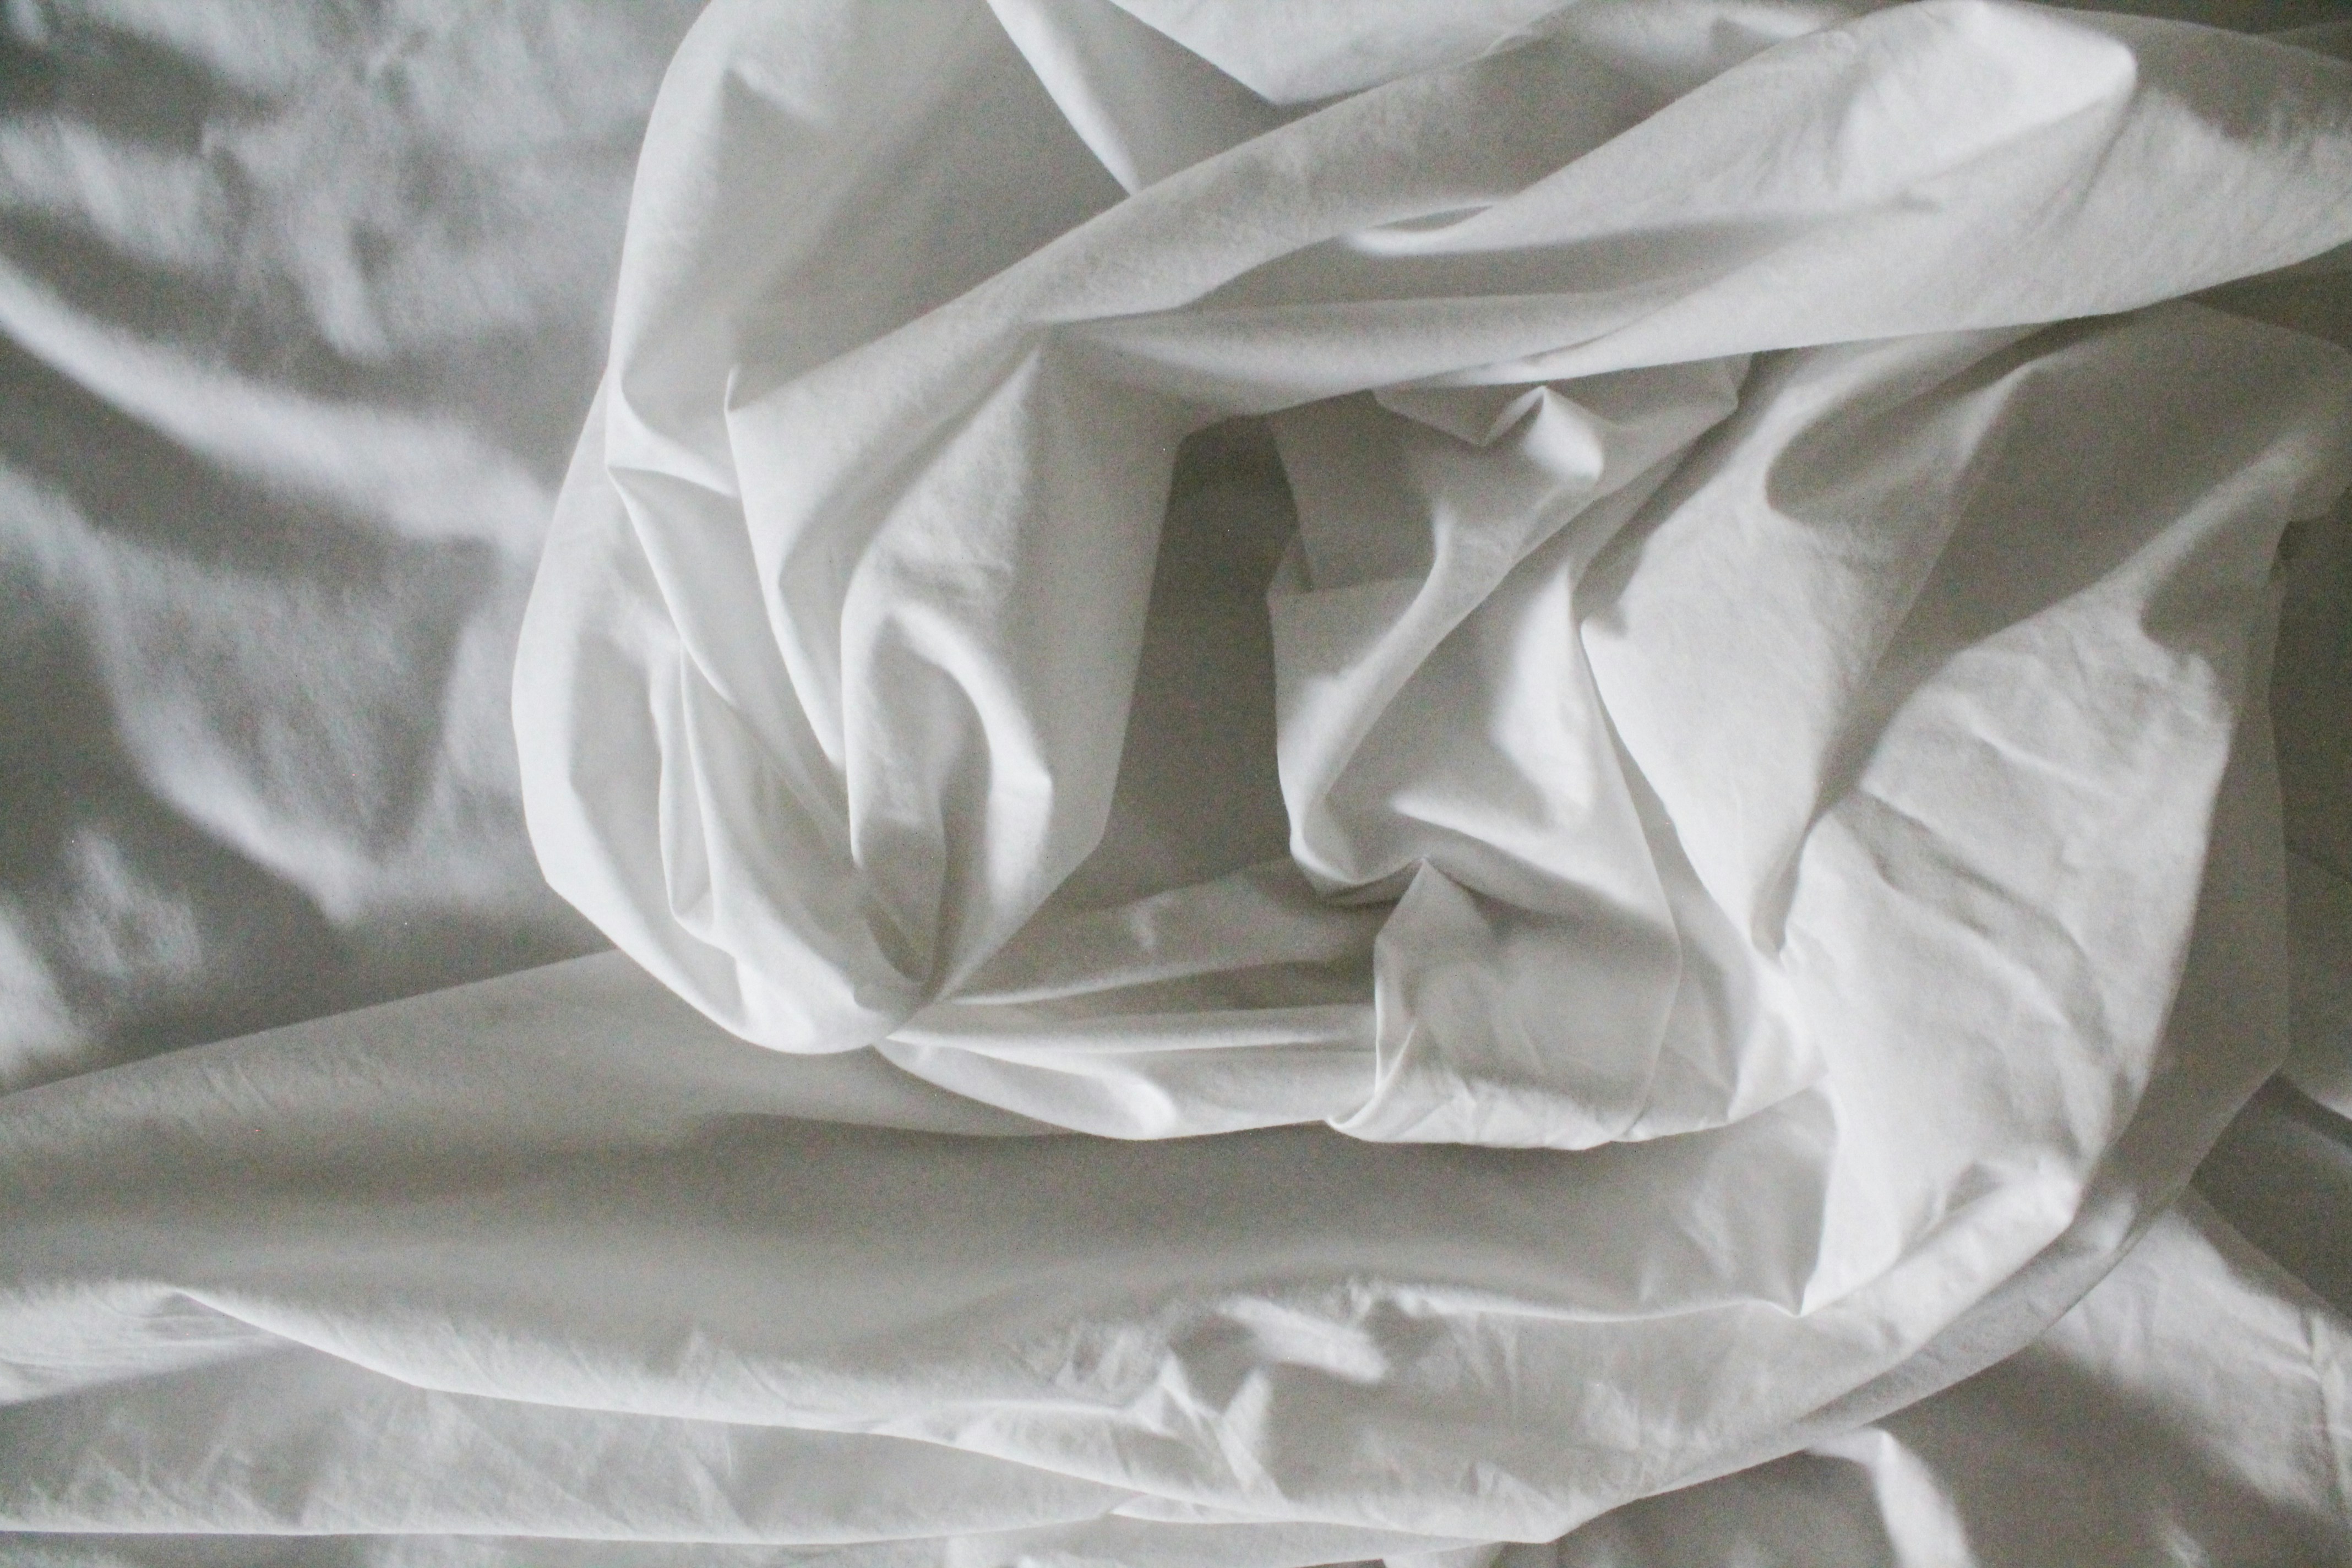 White crumpled sheets photo by Justine Camacho